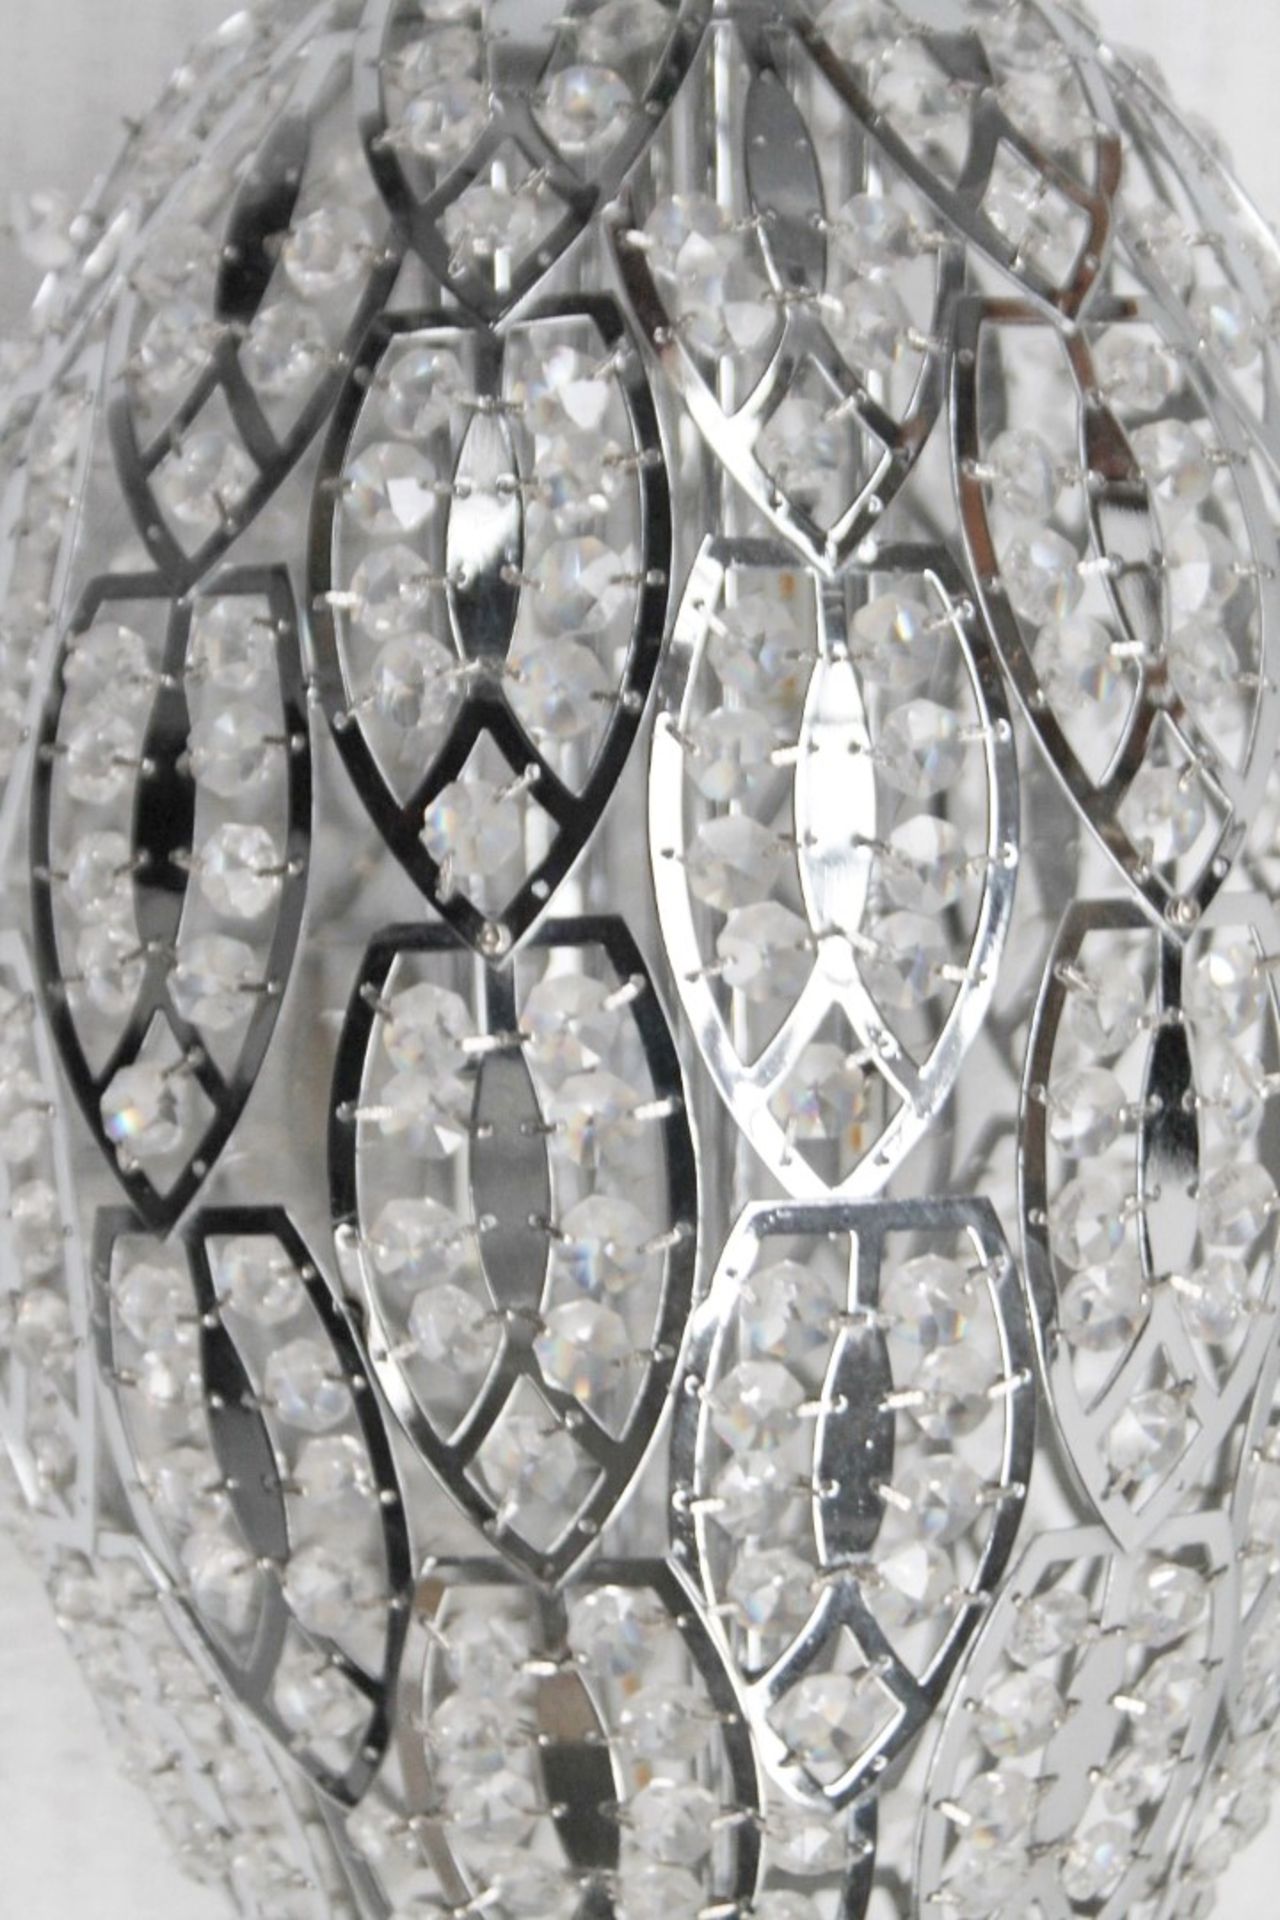 1 x High-end Italian LED Egg-Shaped Light Fitting Encrusted In Premium ASFOUR Crystals - RRP £4,000 - Image 4 of 9